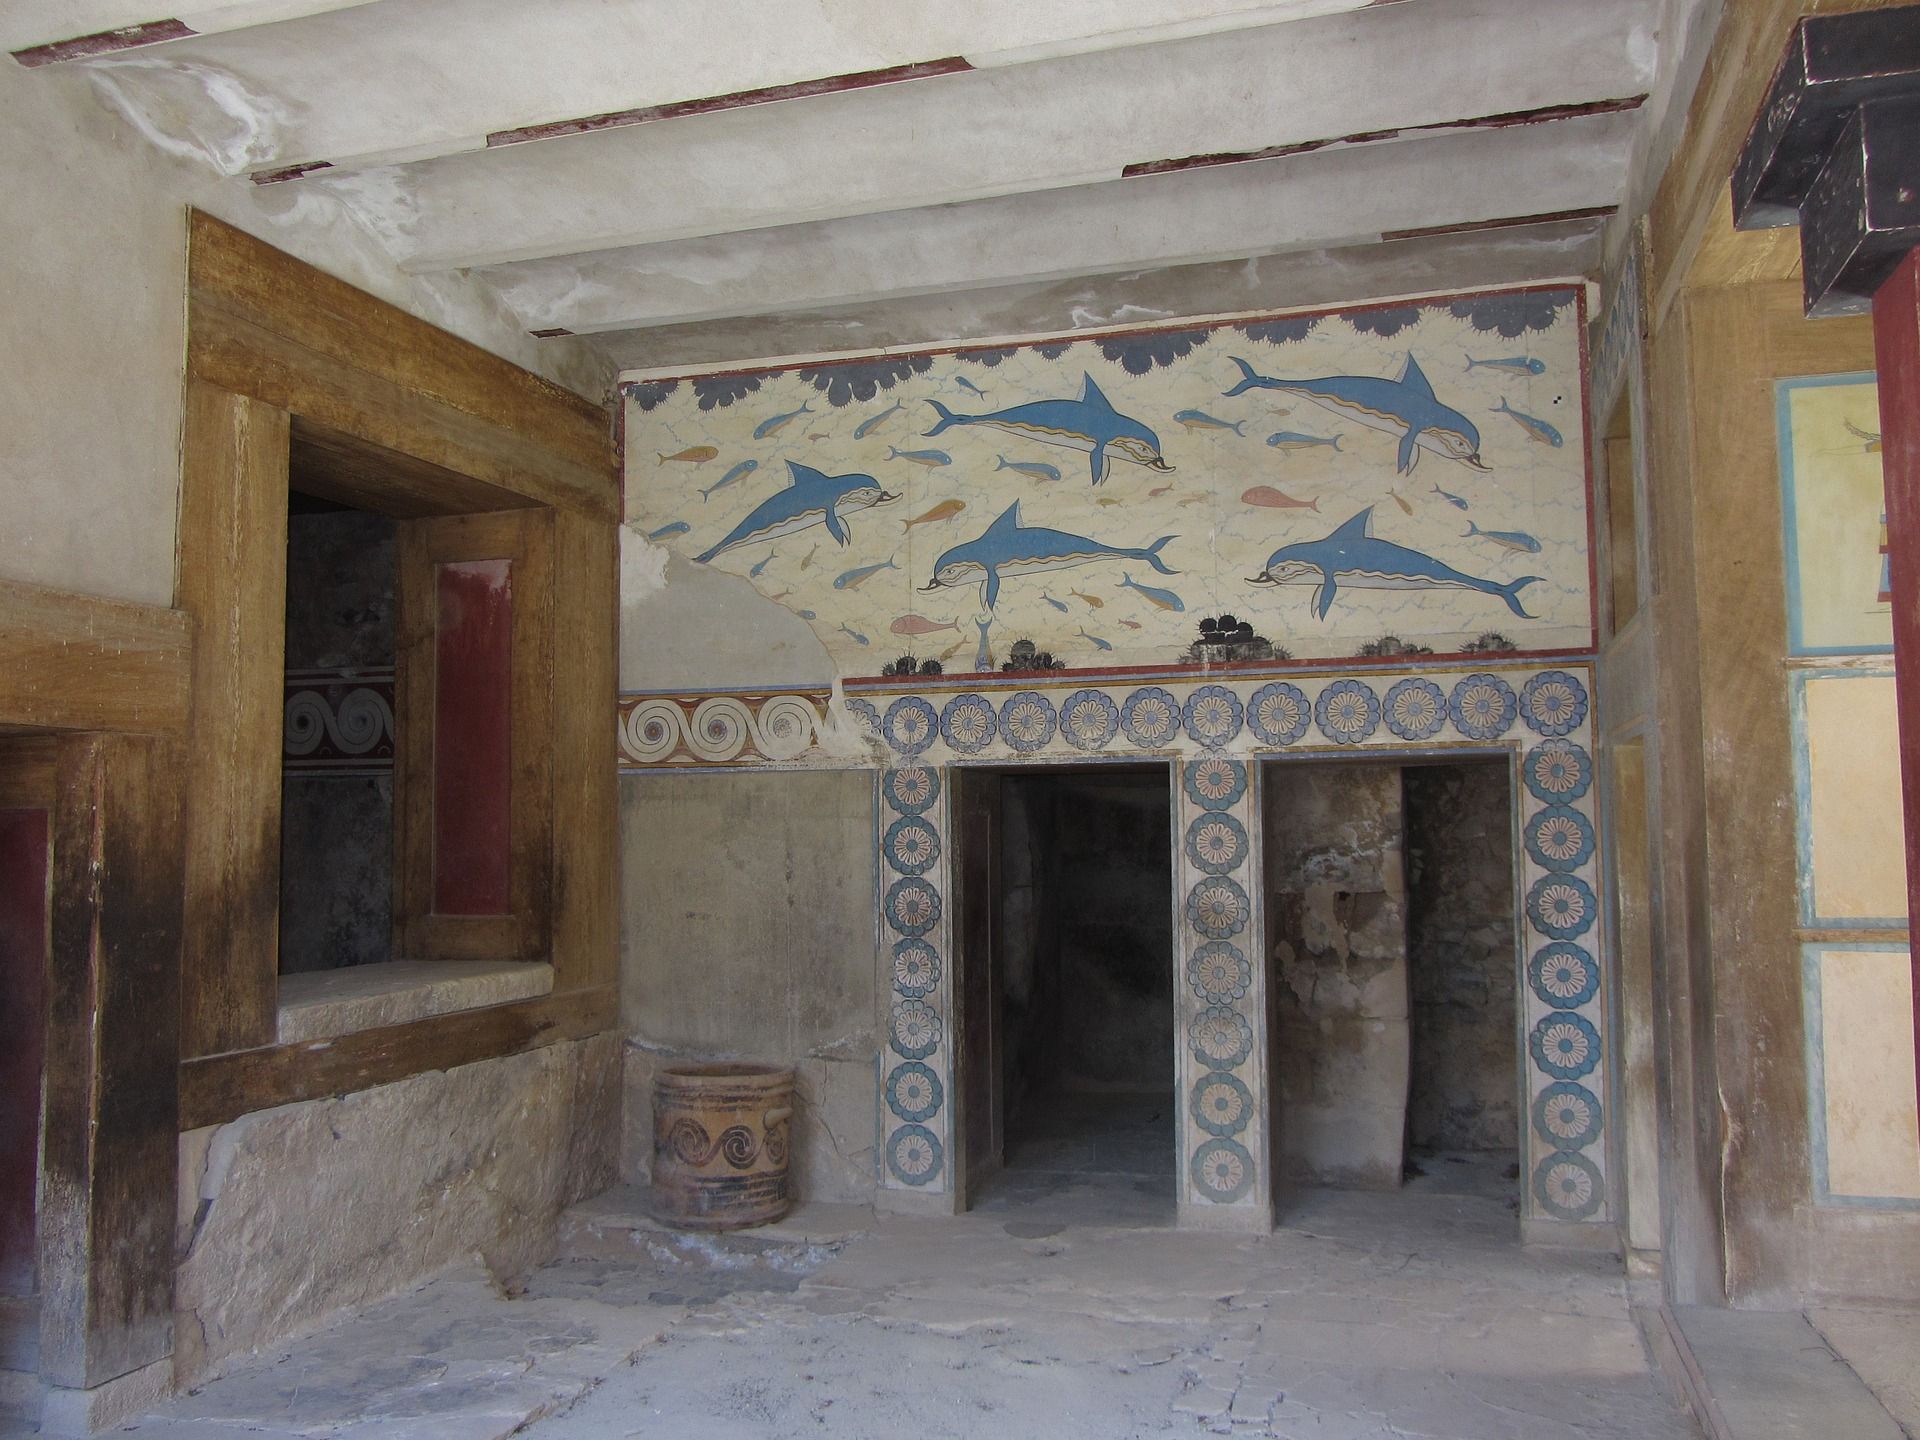 Dolphin frescoes at Knossos, Crete, in Greece